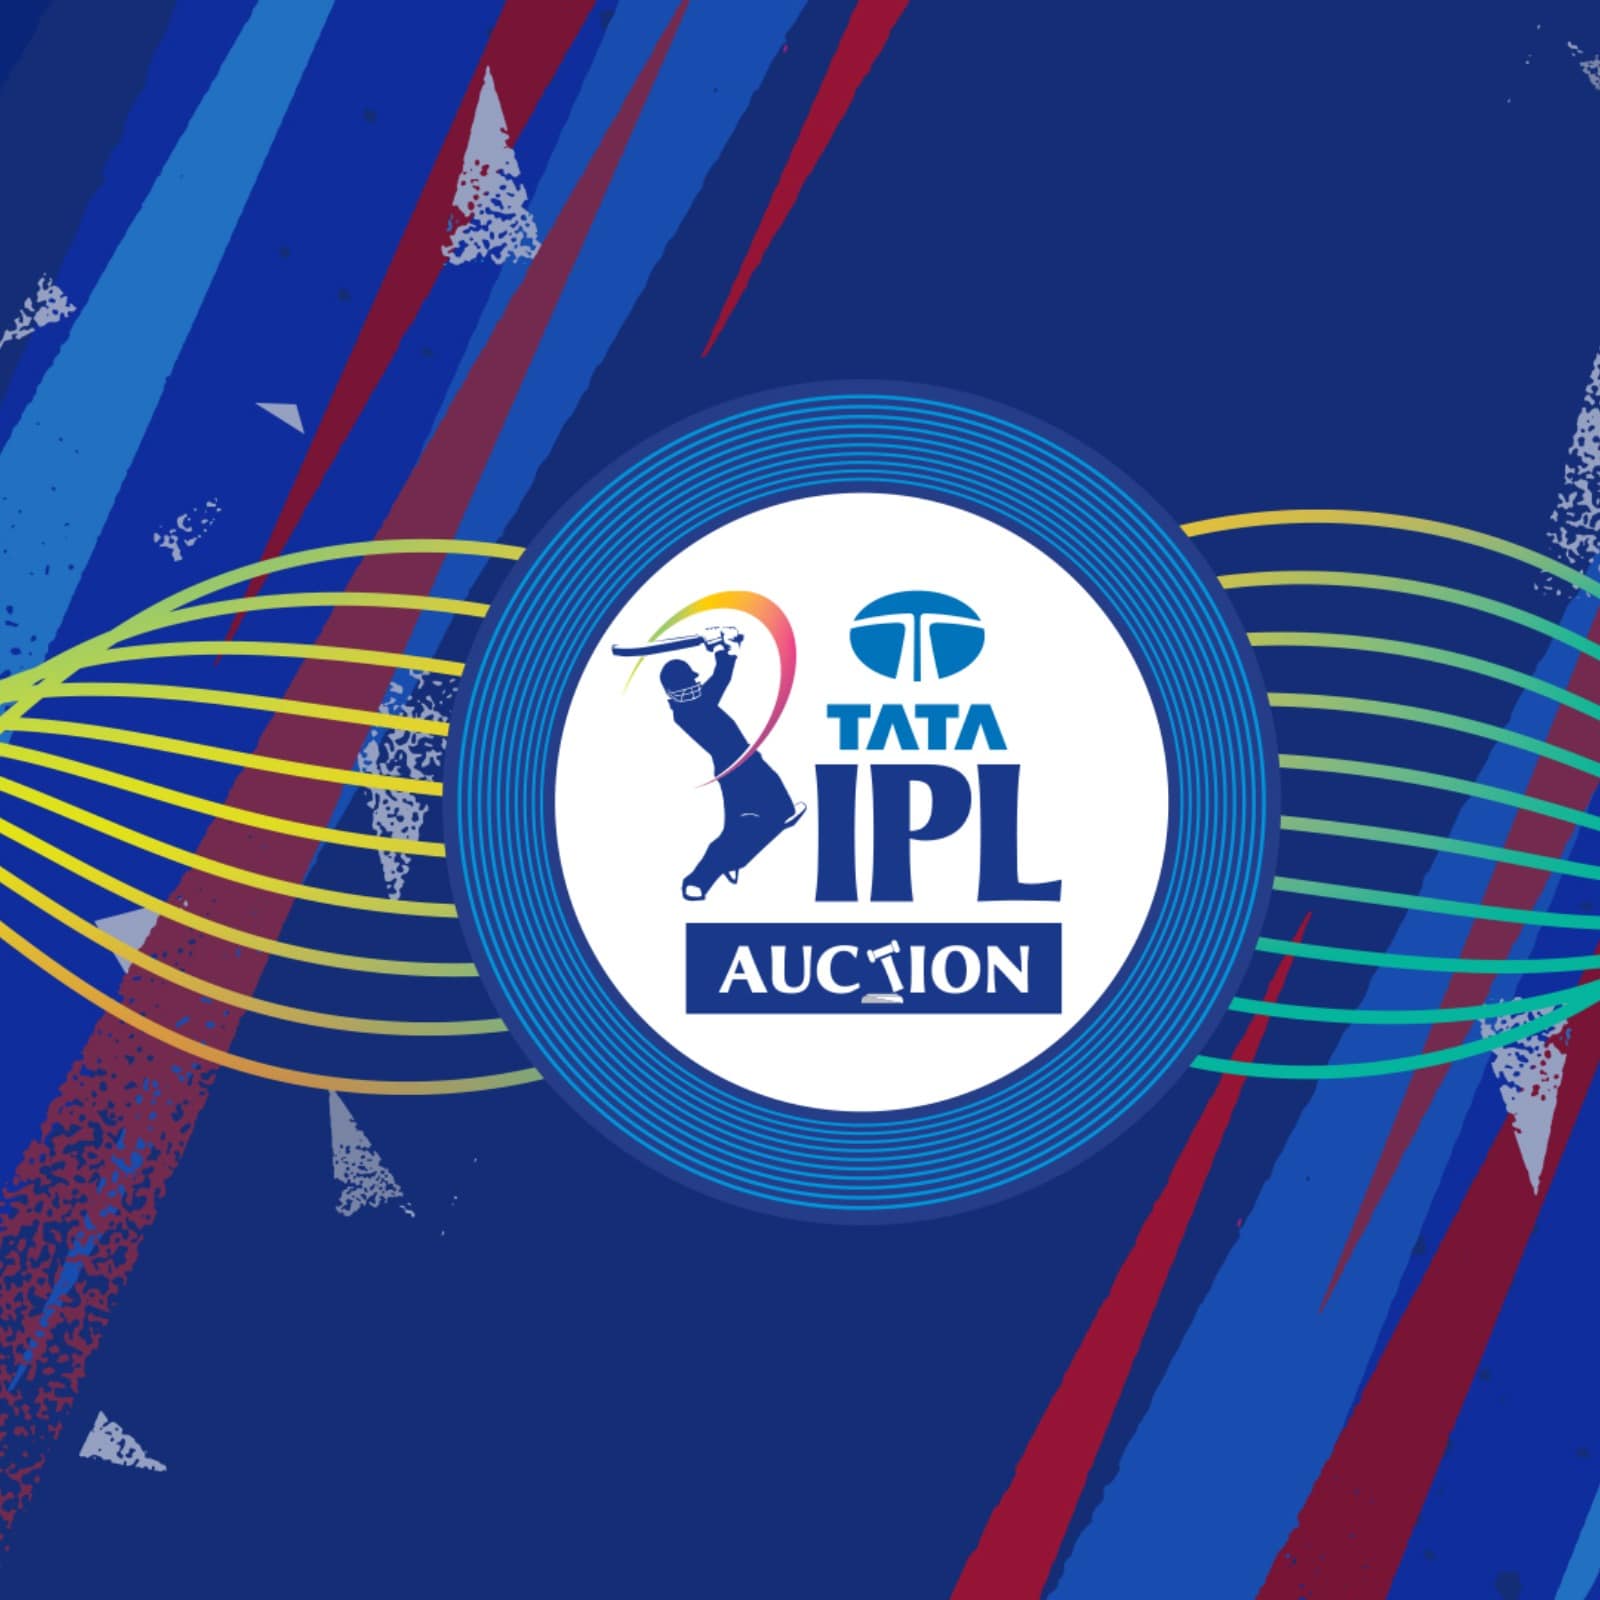 IPL Auction Live 2022 | IPL 2022 Auction Live Updates, Live Commentary,  News on Players Sold, Unsold & Full squad Details